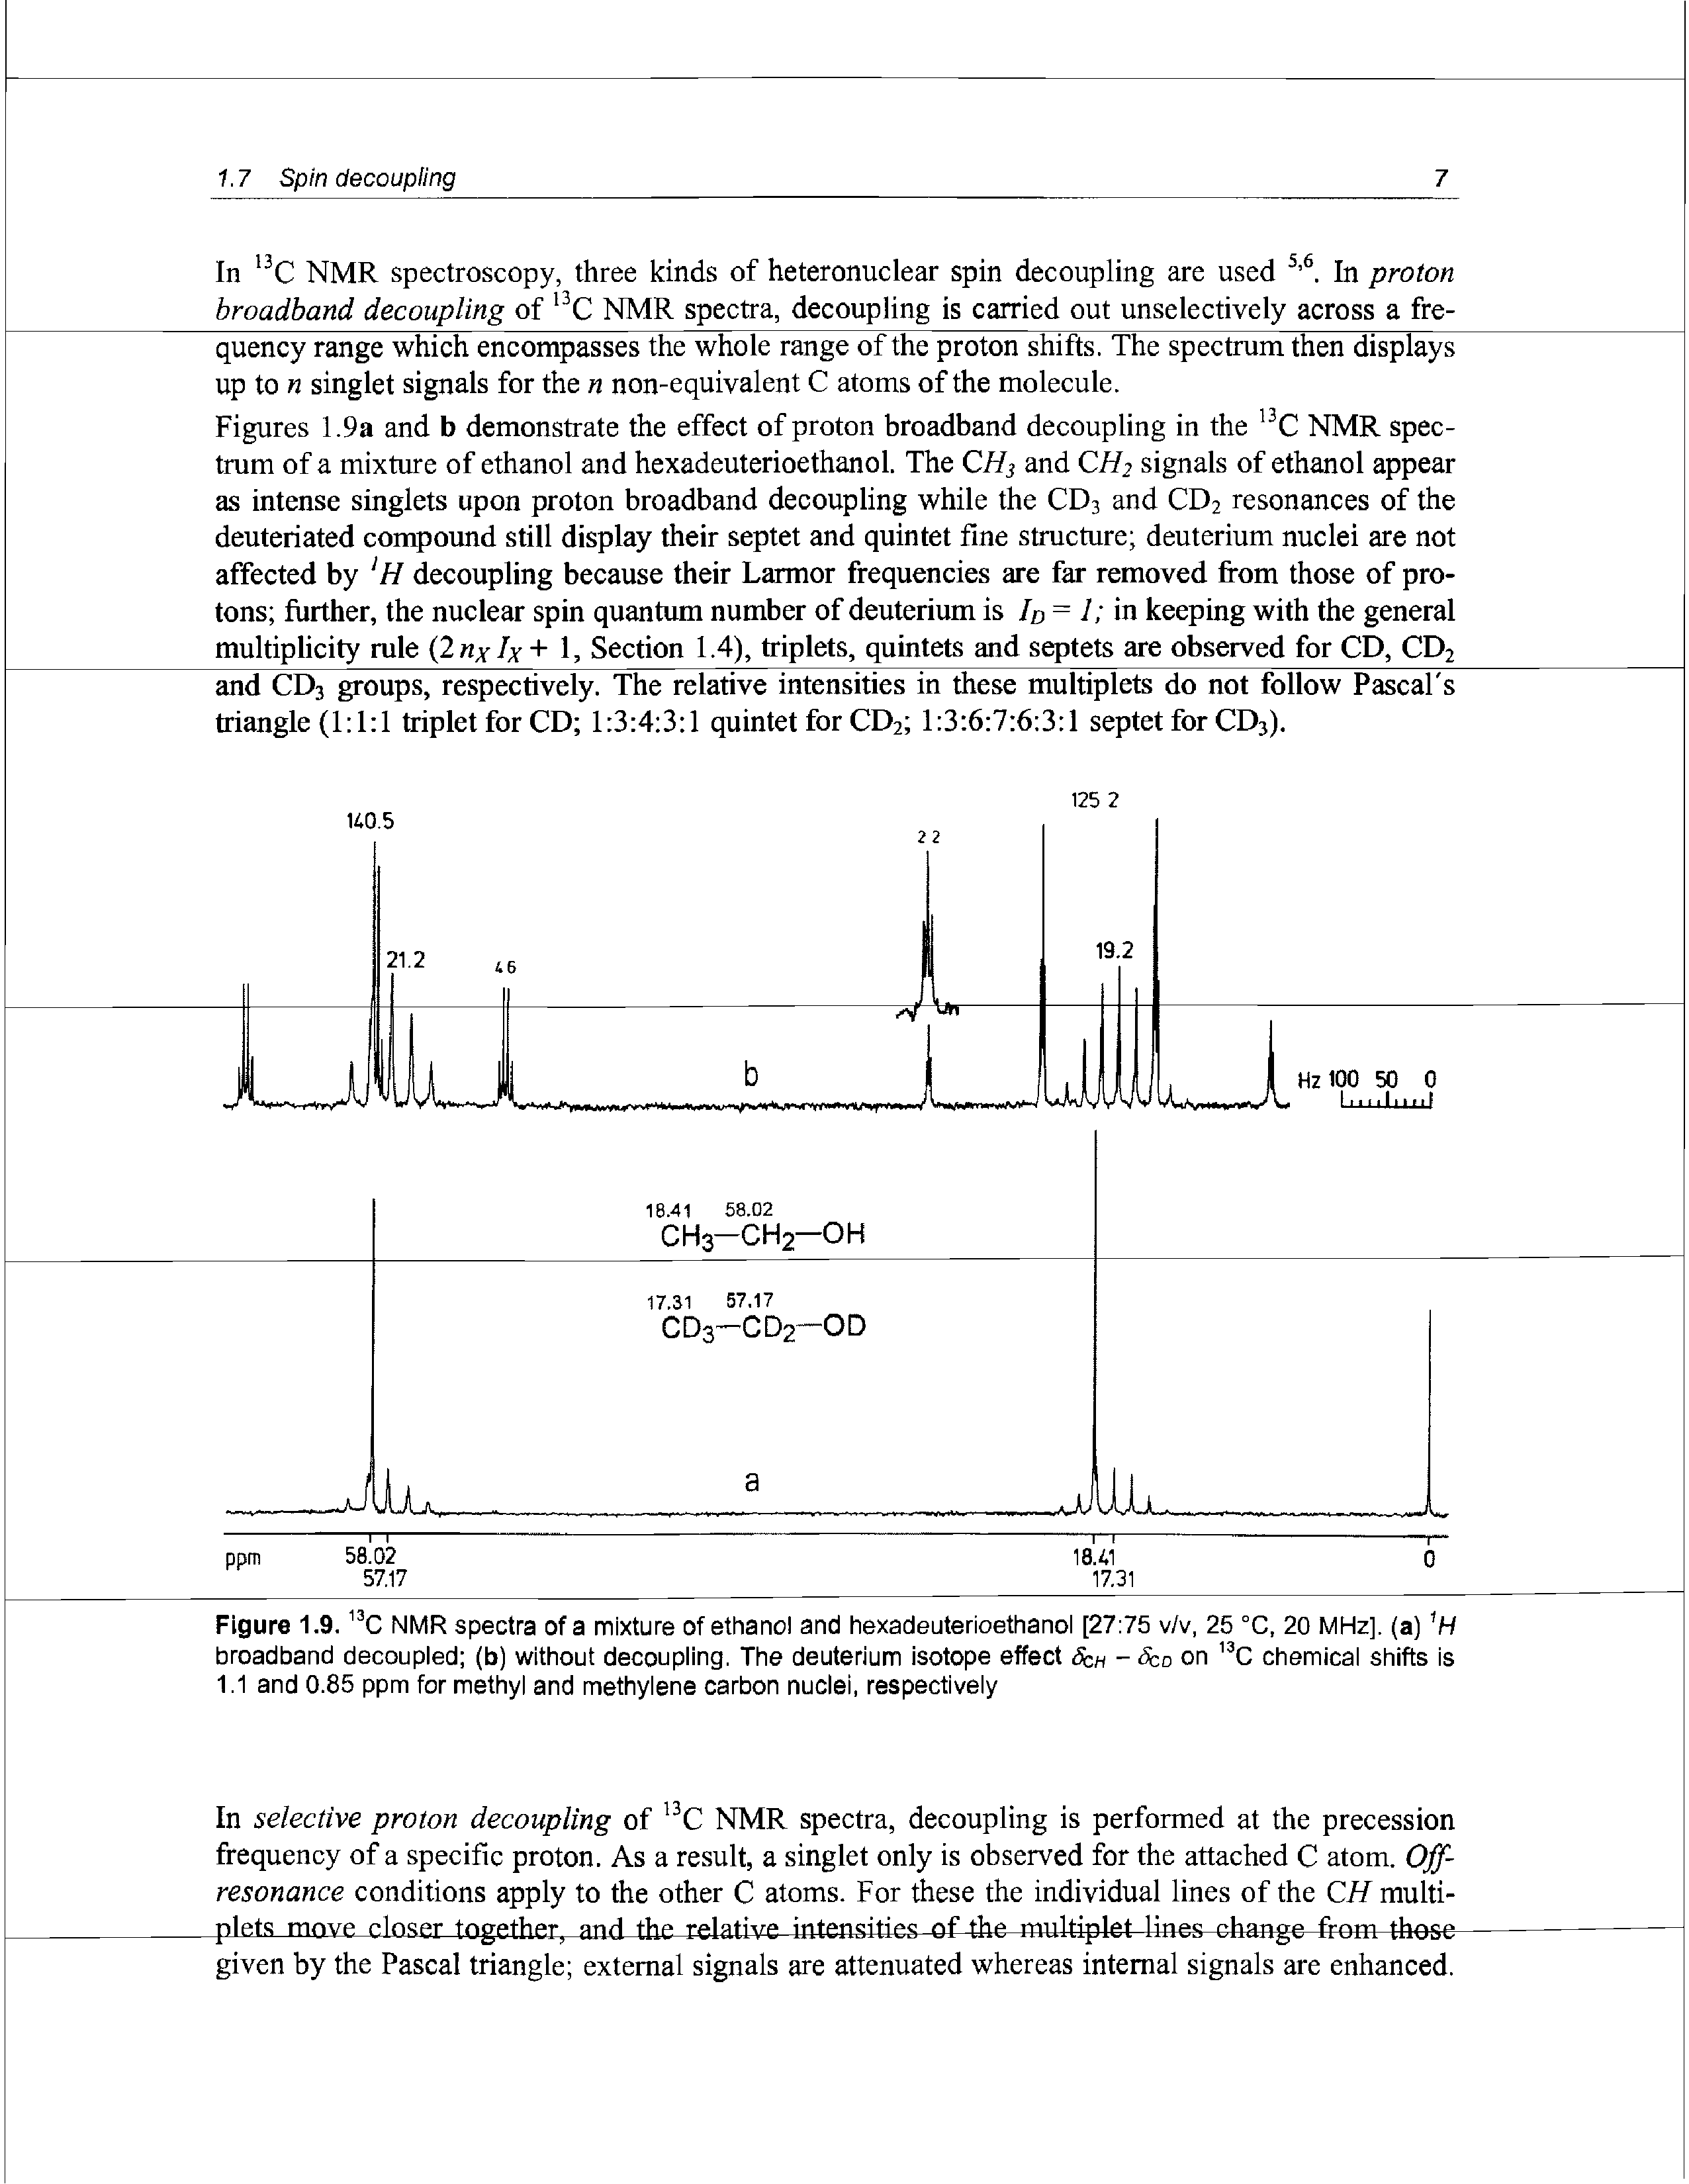 Figures 1.9a and b demonstrate the effect of proton broadband decoupling in the 13C NMR spectrum of a mixture of ethanol and hexadeuterioethanol. The CH3 and CH2 signals of ethanol appear as intense singlets upon proton broadband decoupling while the CD3 and CD2 resonances of the deuteriated compound still display their septet and quintet fine structure deuterium nuclei are not affected by lH decoupling because their Larmor frequencies are far removed from those of protons further, the nuclear spin quantum number of deuterium is ID = 1 in keeping with the general multiplicity rule (2 nxh+ 1, Section 1.4), triplets, quintets and septets are observed for CD, CD2 and CD3 groups, respectively. The relative intensities in these multiplets do not follow Pascal s triangle (1 1 1 triplet for CD 1 3 4 3 1 quintet for CD2 1 3 6 7 6 3 1 septet for CD3).